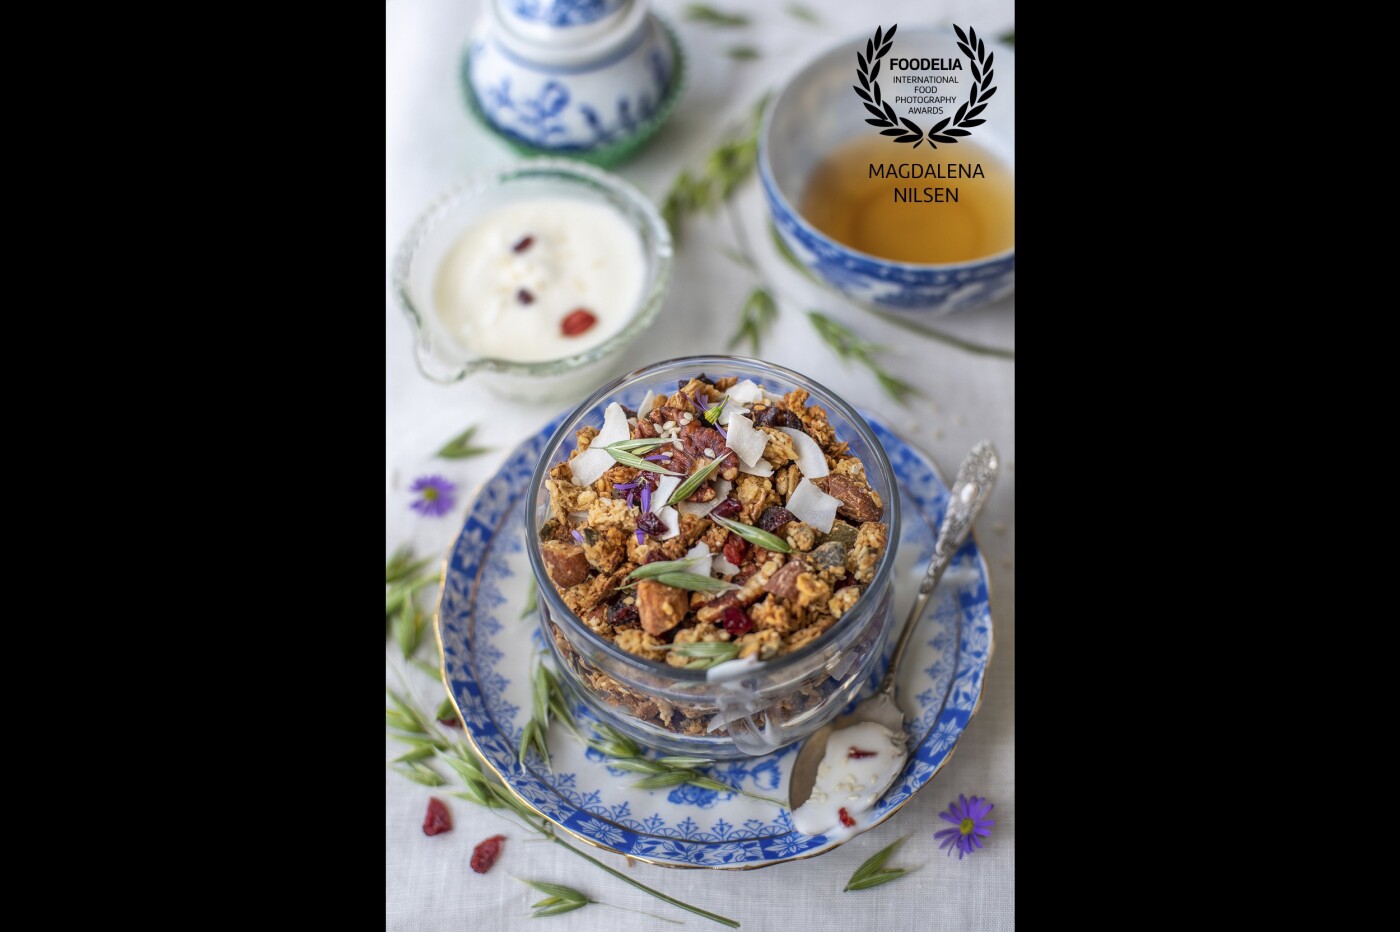 There is nothing better than healthy, organic granola for breakfast together with a cup of your favorite green tea. Relax and enjoy your day. 